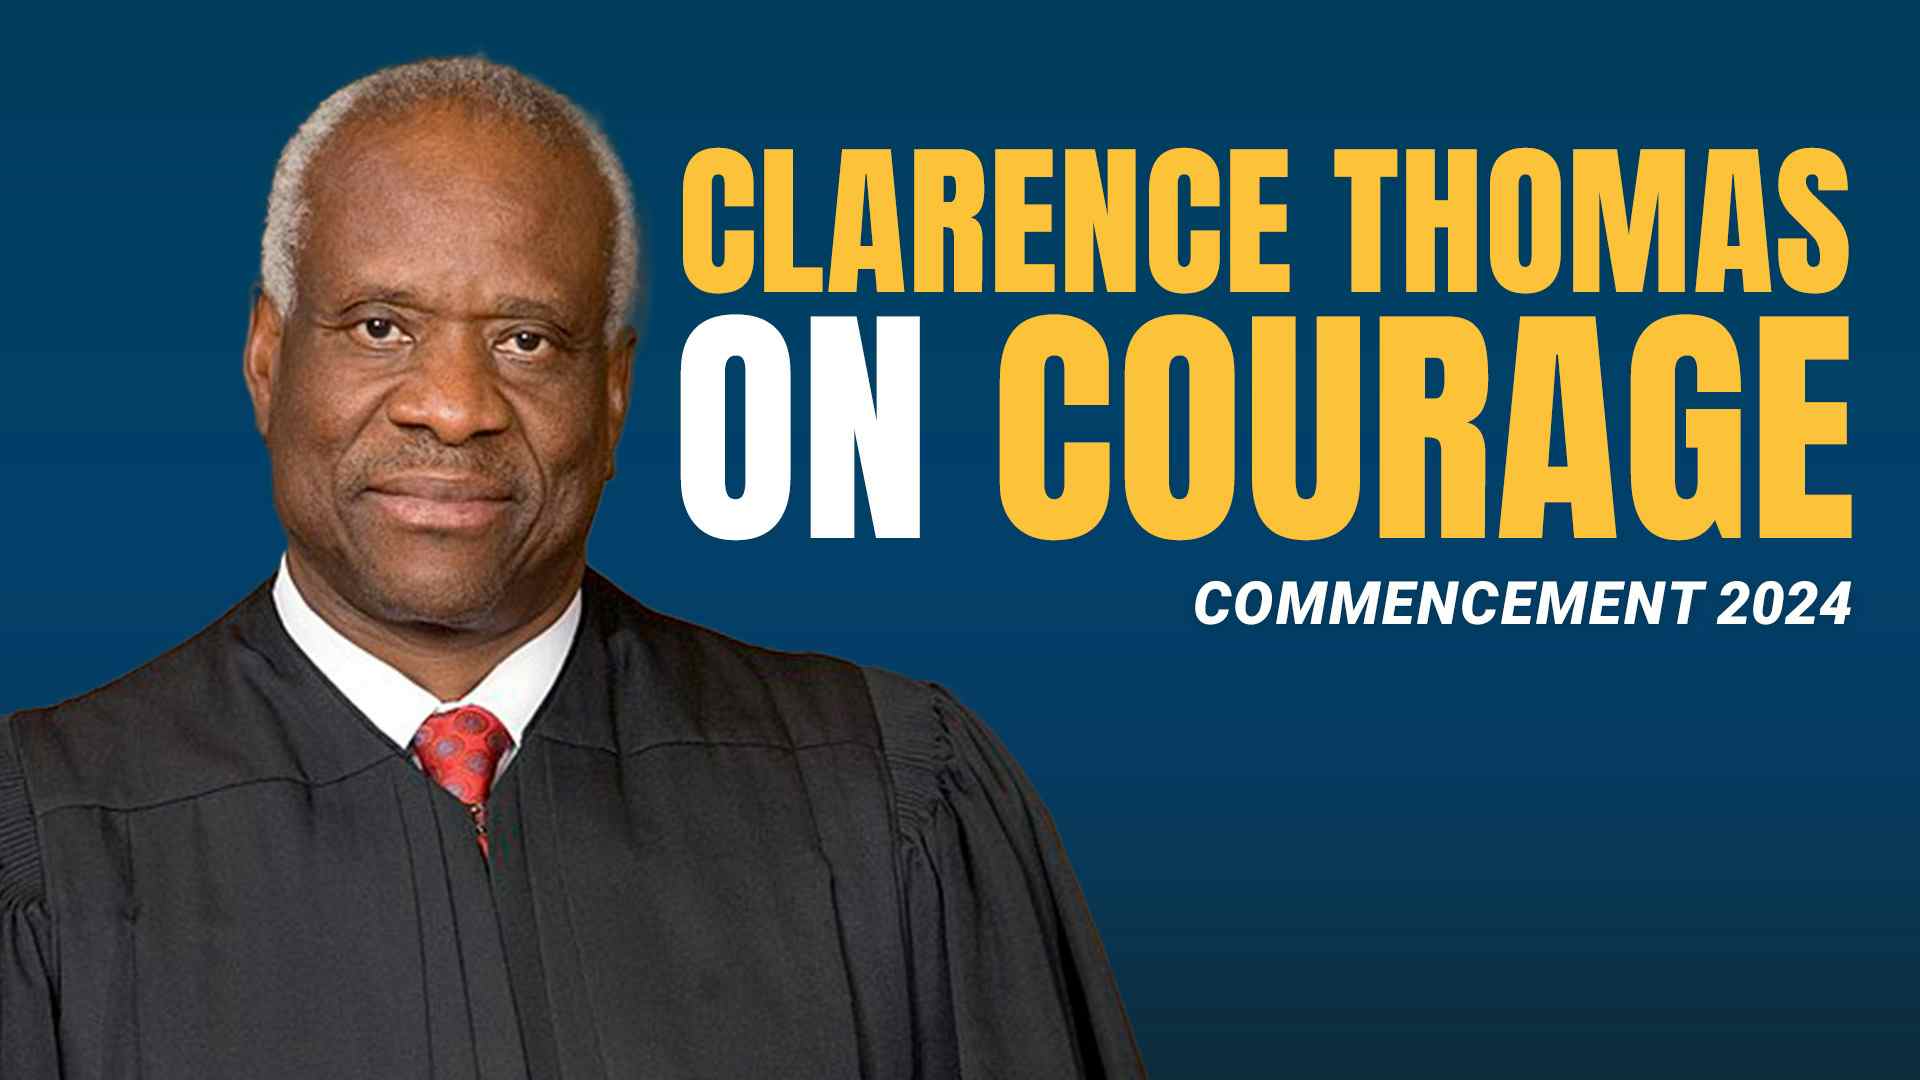 Clarence Thomas on Courage